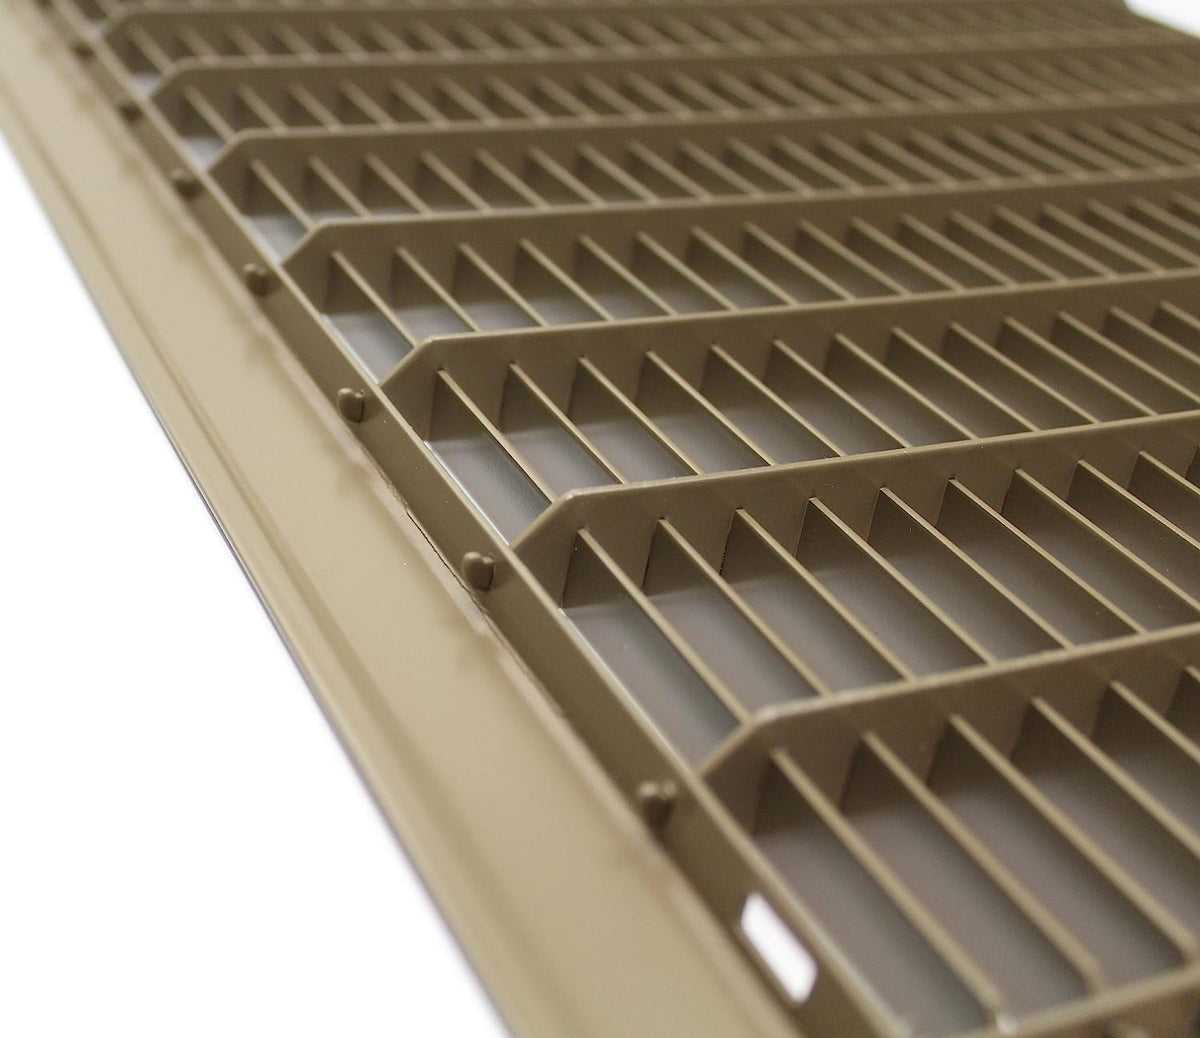 10&quot; X 30&quot; or 30&quot; X 10&quot; Heavy Duty Floor Grille - Fixed Blades Air Grille - Brown [Outer Dimensions: 11.75 X 31.75]